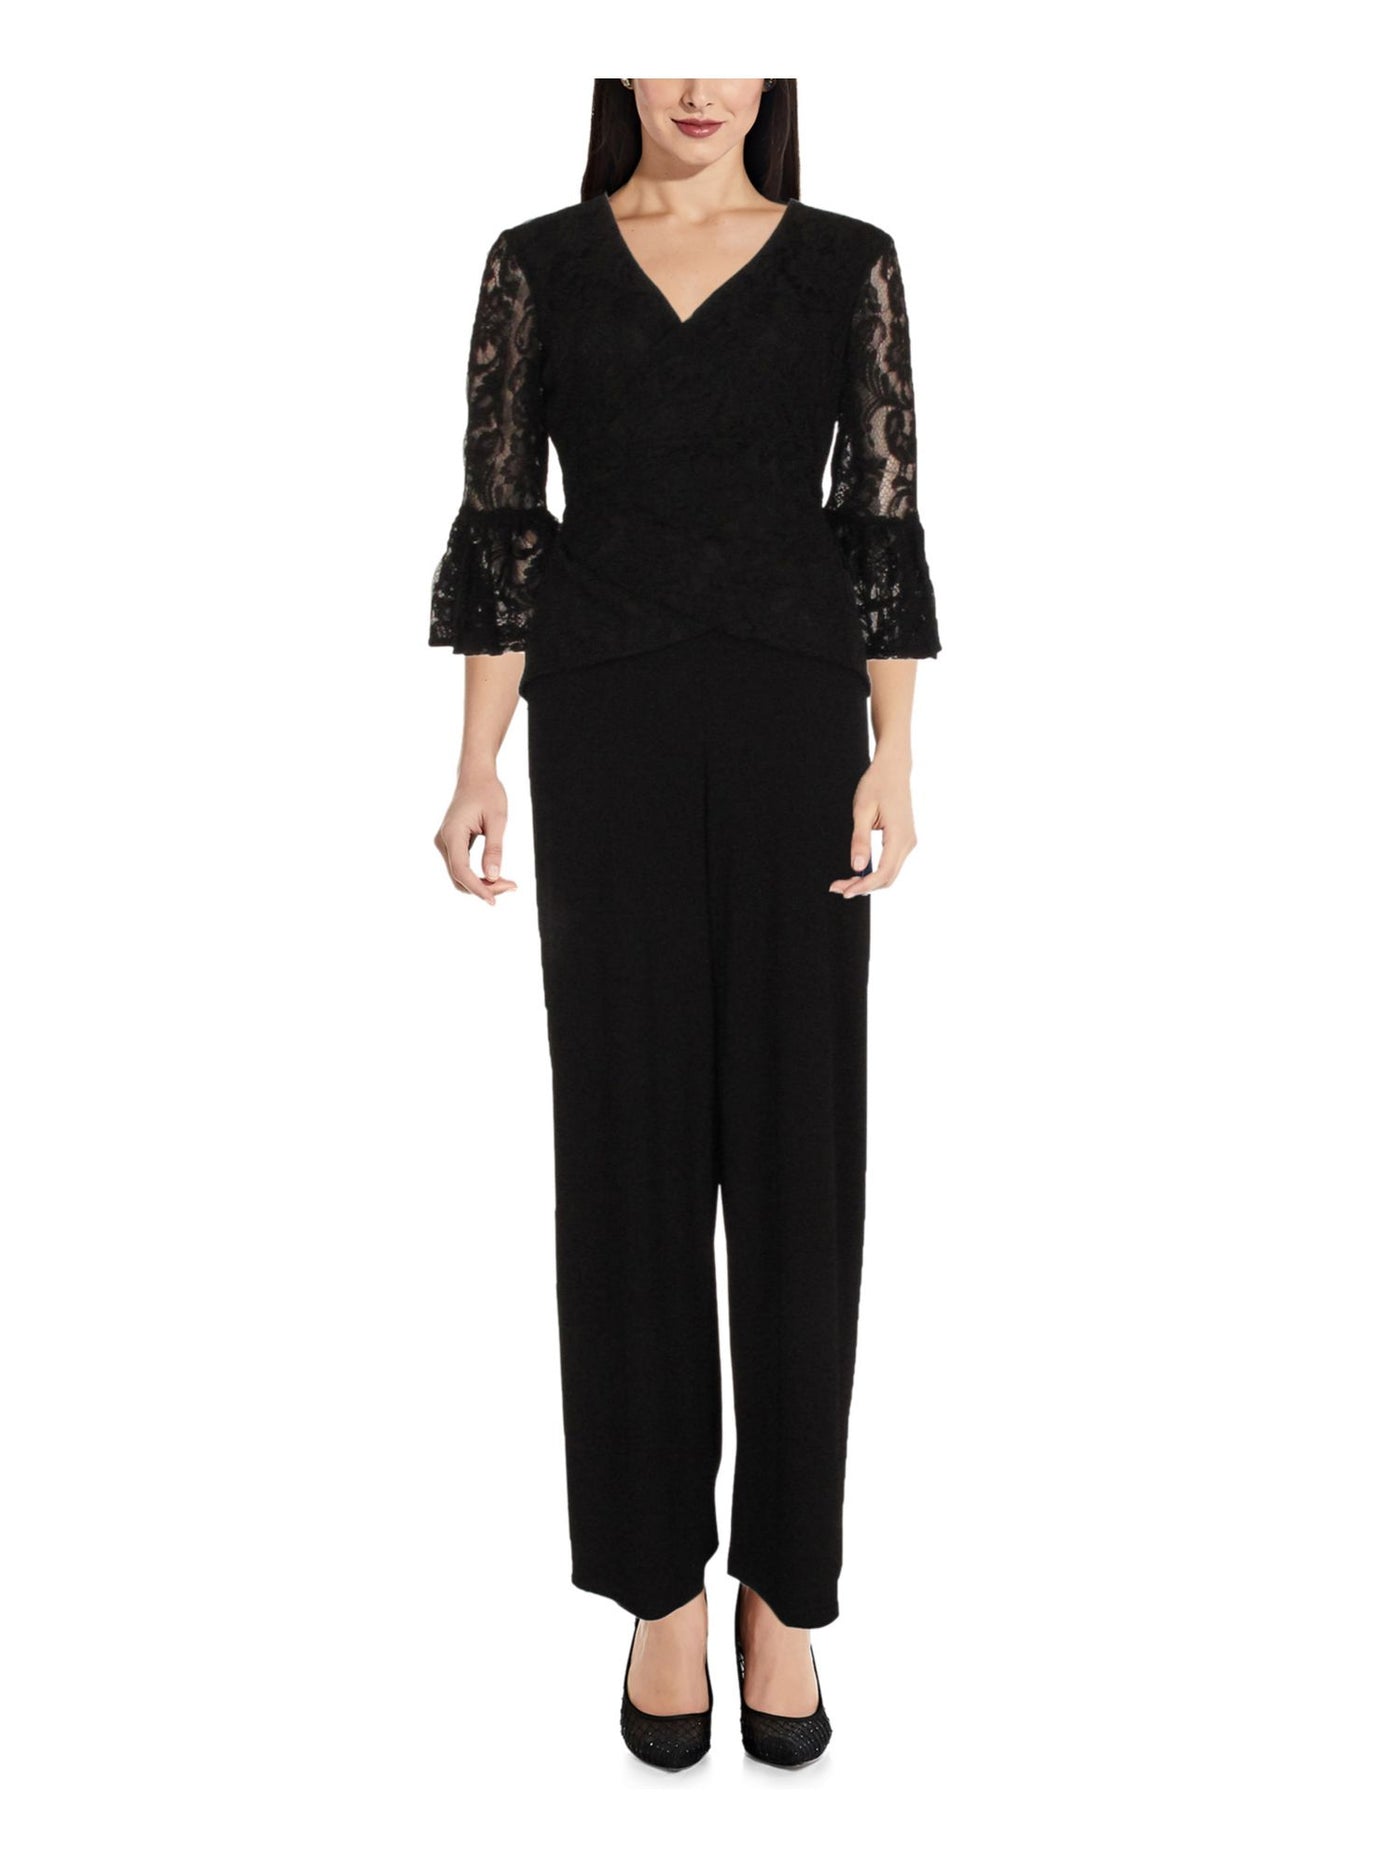 ADRIANNA PAPELL Womens Black Jersey Lace Evening Straight leg Jumpsuit 2